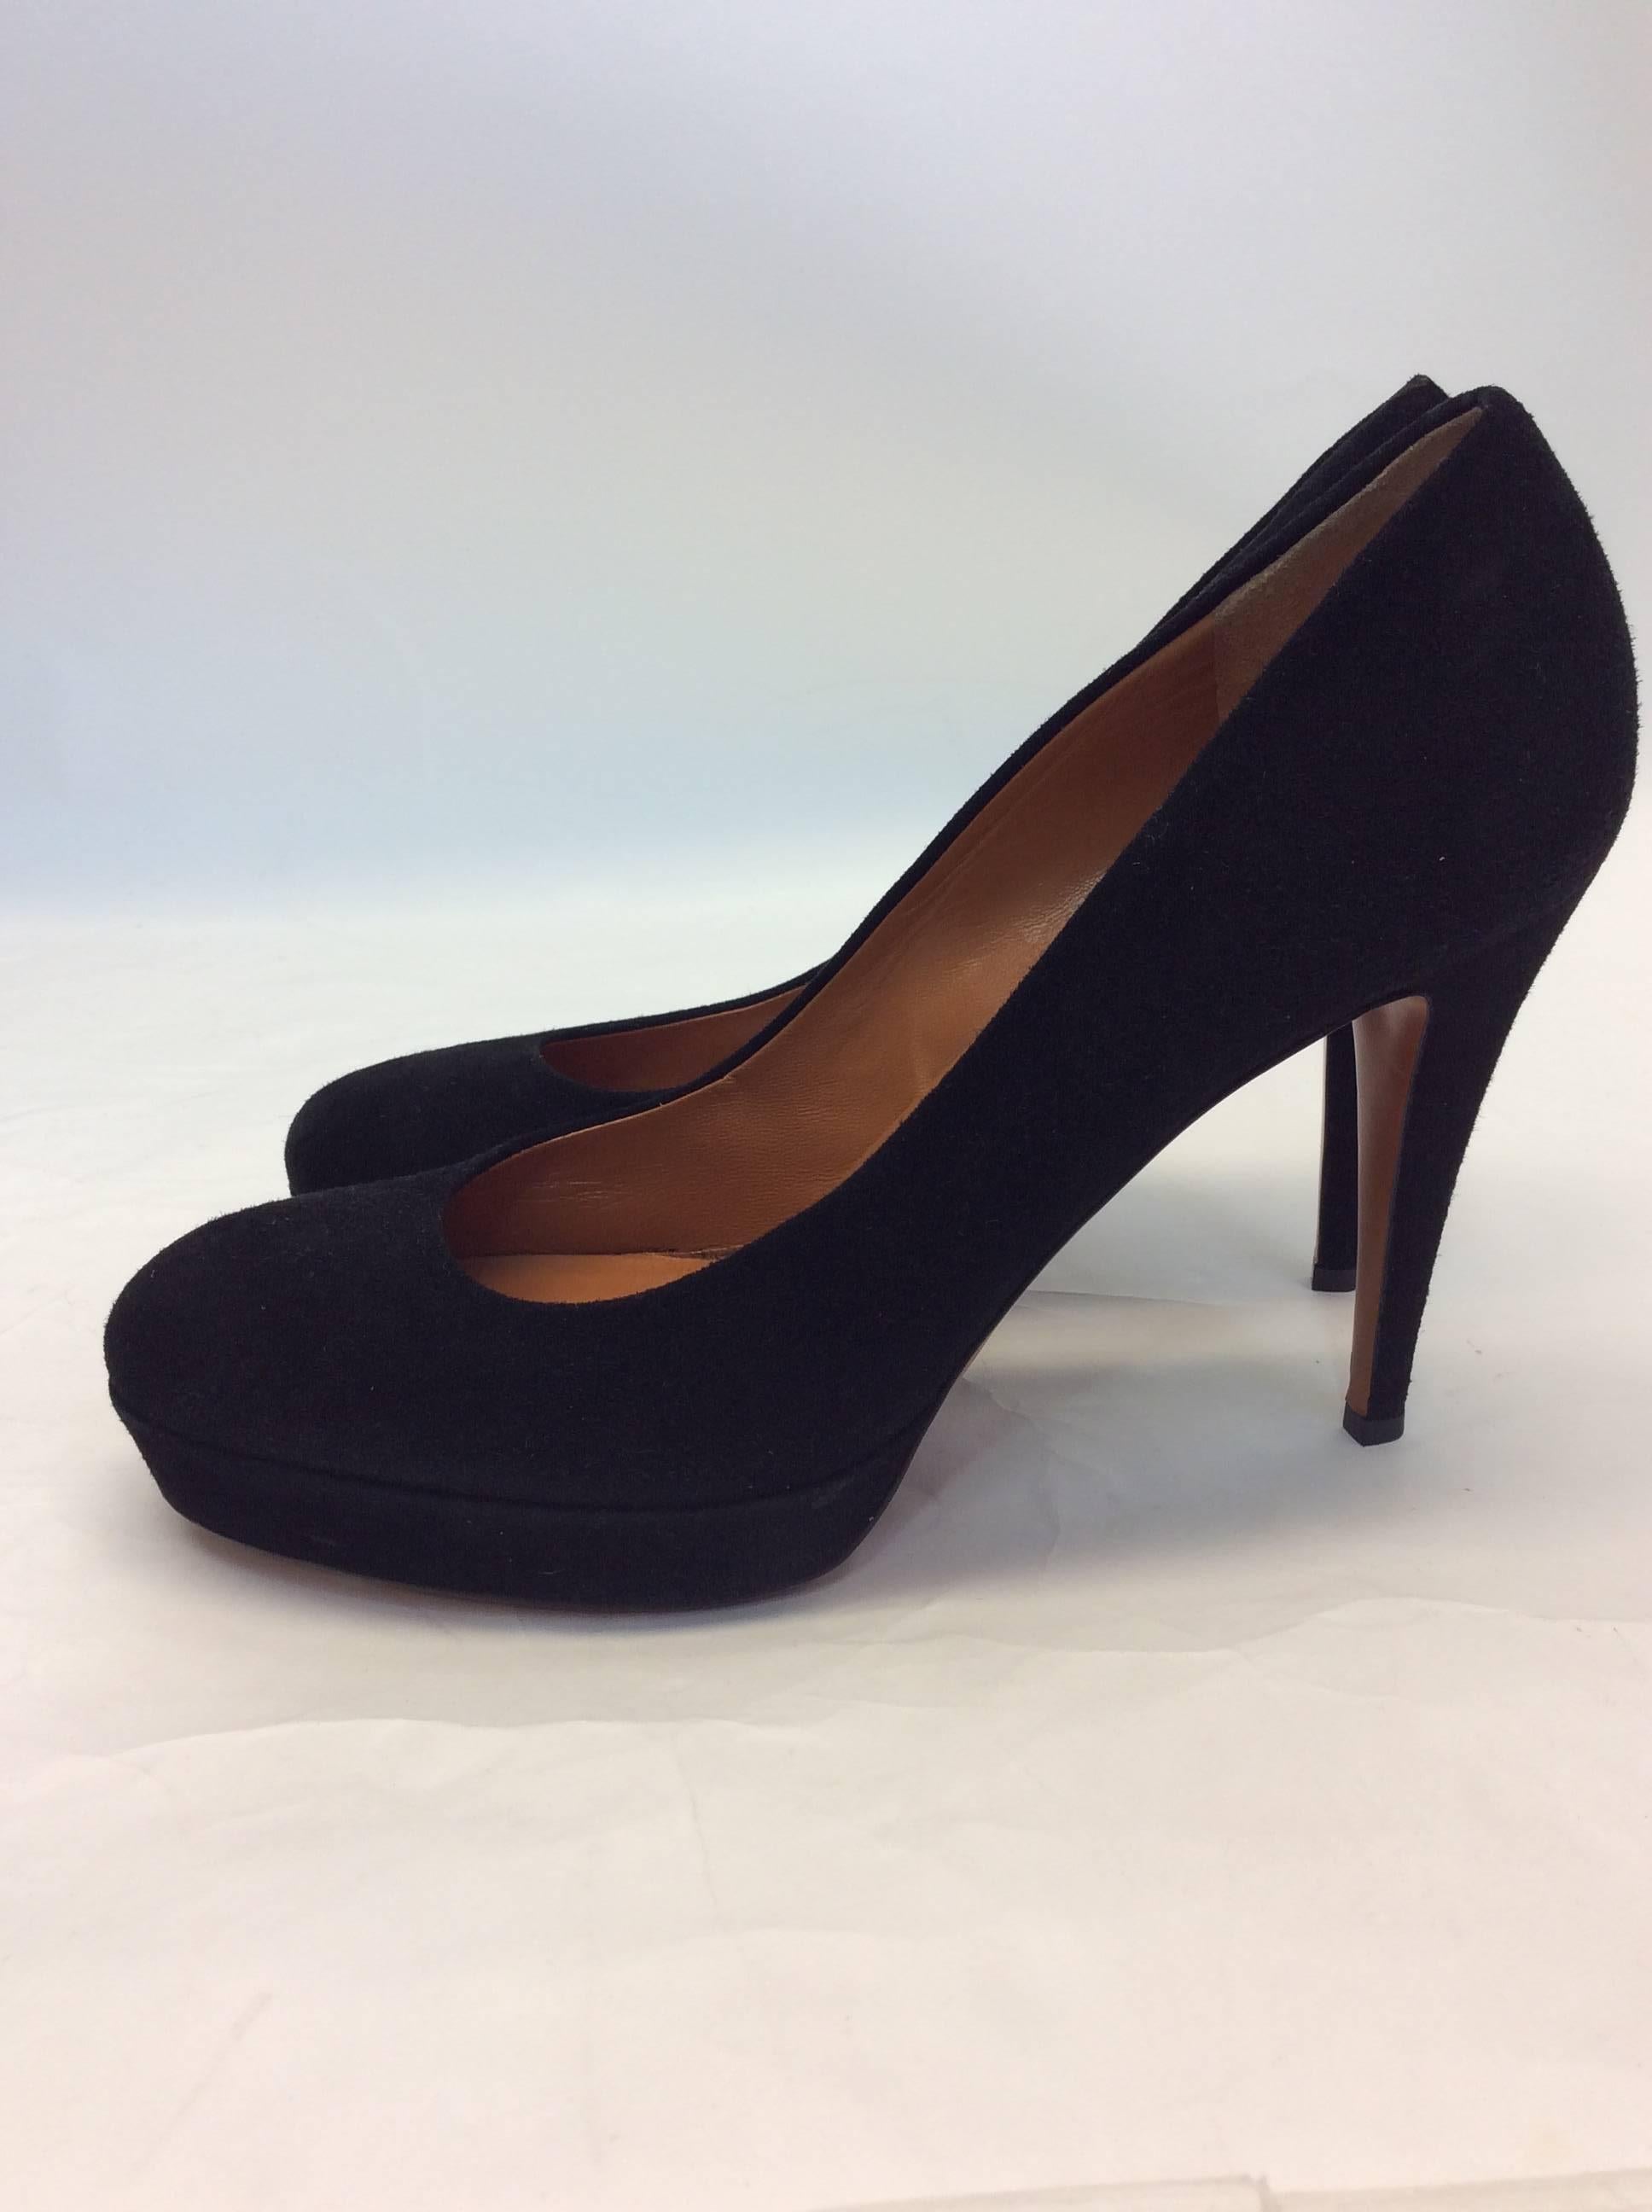 Gucci Black Suede Pumps
4 inch heel
Made in Italy 
Size 41
$285